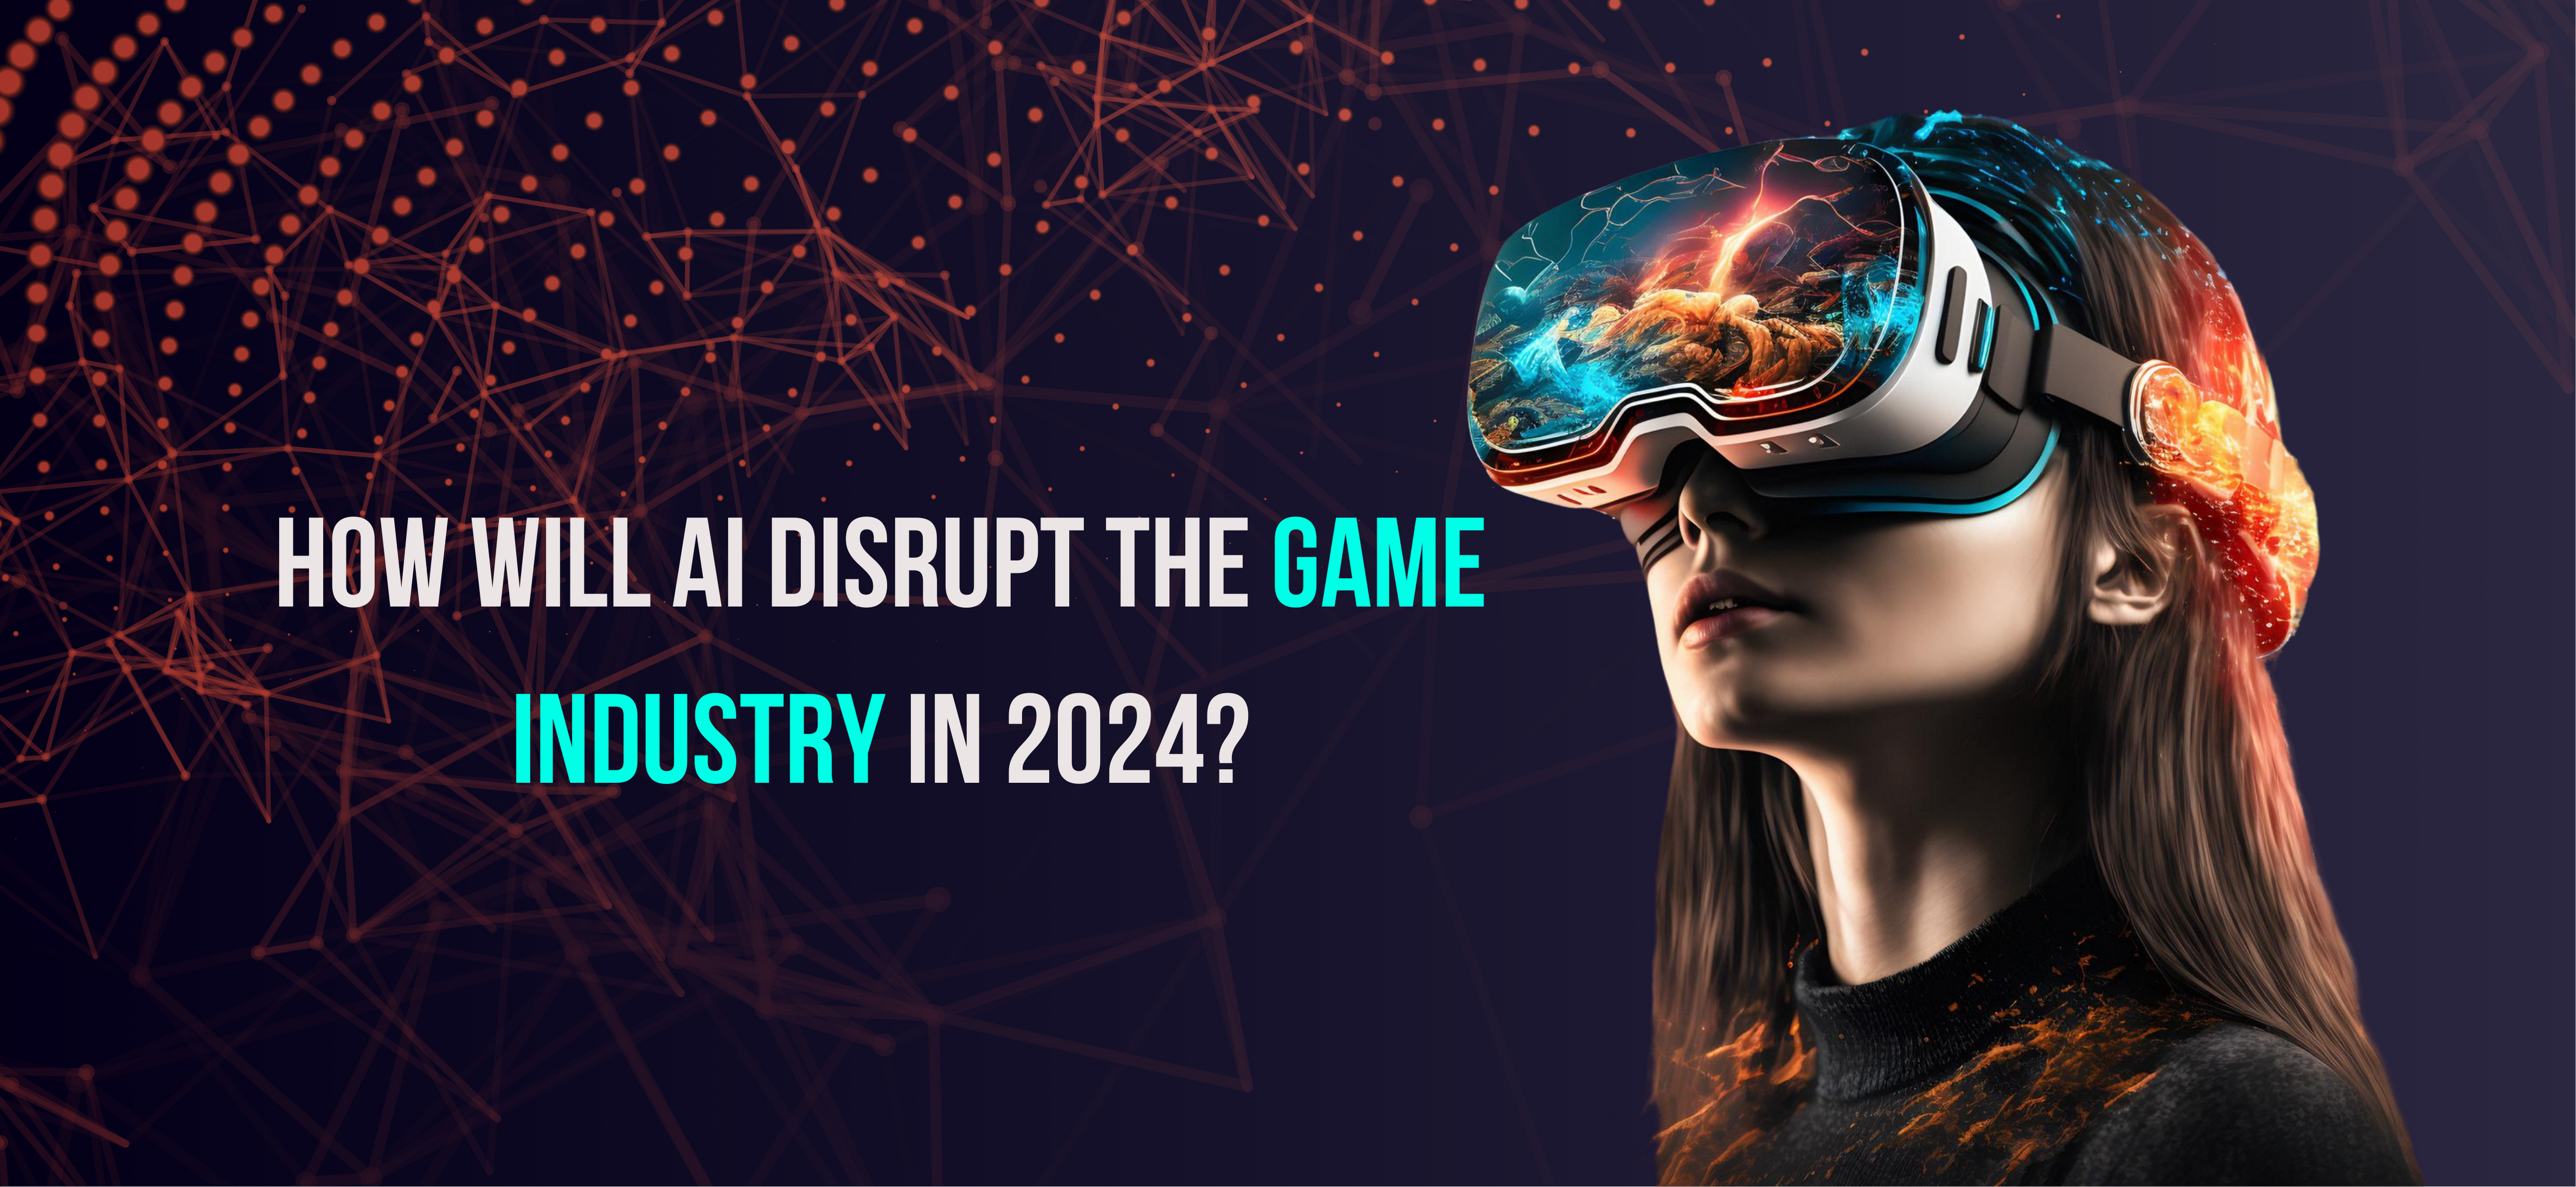 How Will AI Disrupt the Game Industry in 2024? - Internet Soft